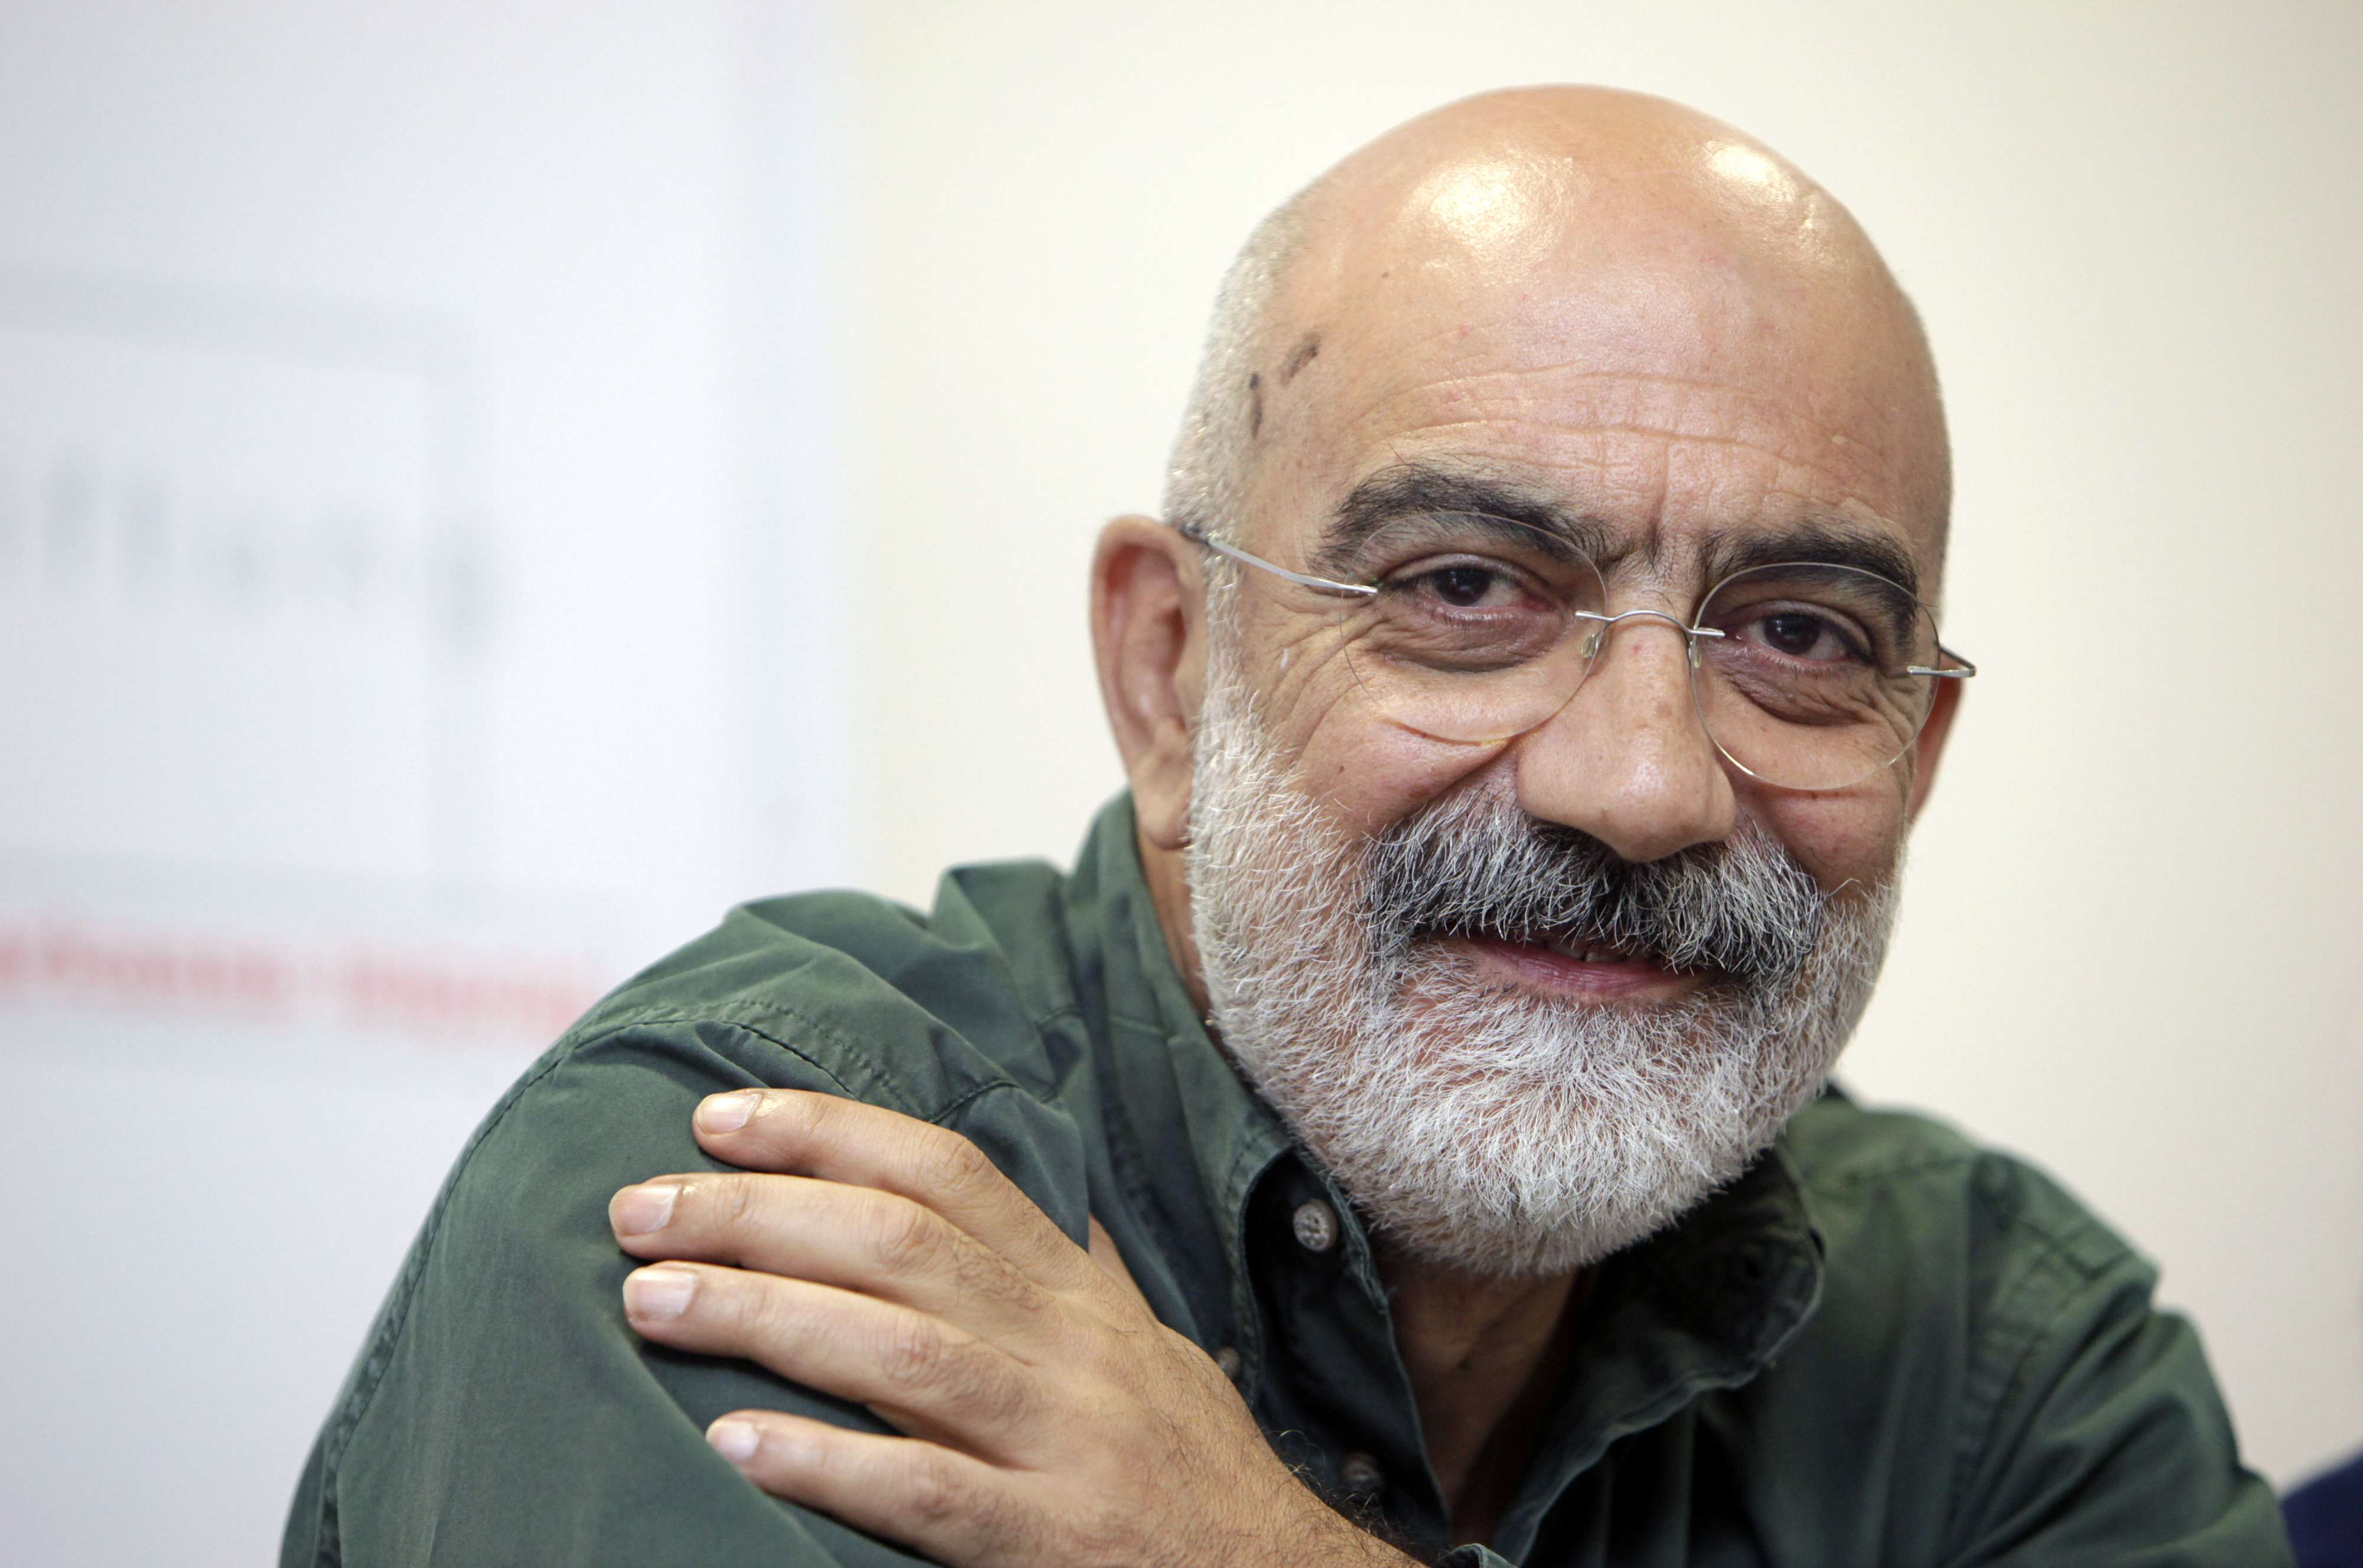 Prominent journalist Ahmet Altan remains in prison on coup-related charges for articles he wrote, along with many others.